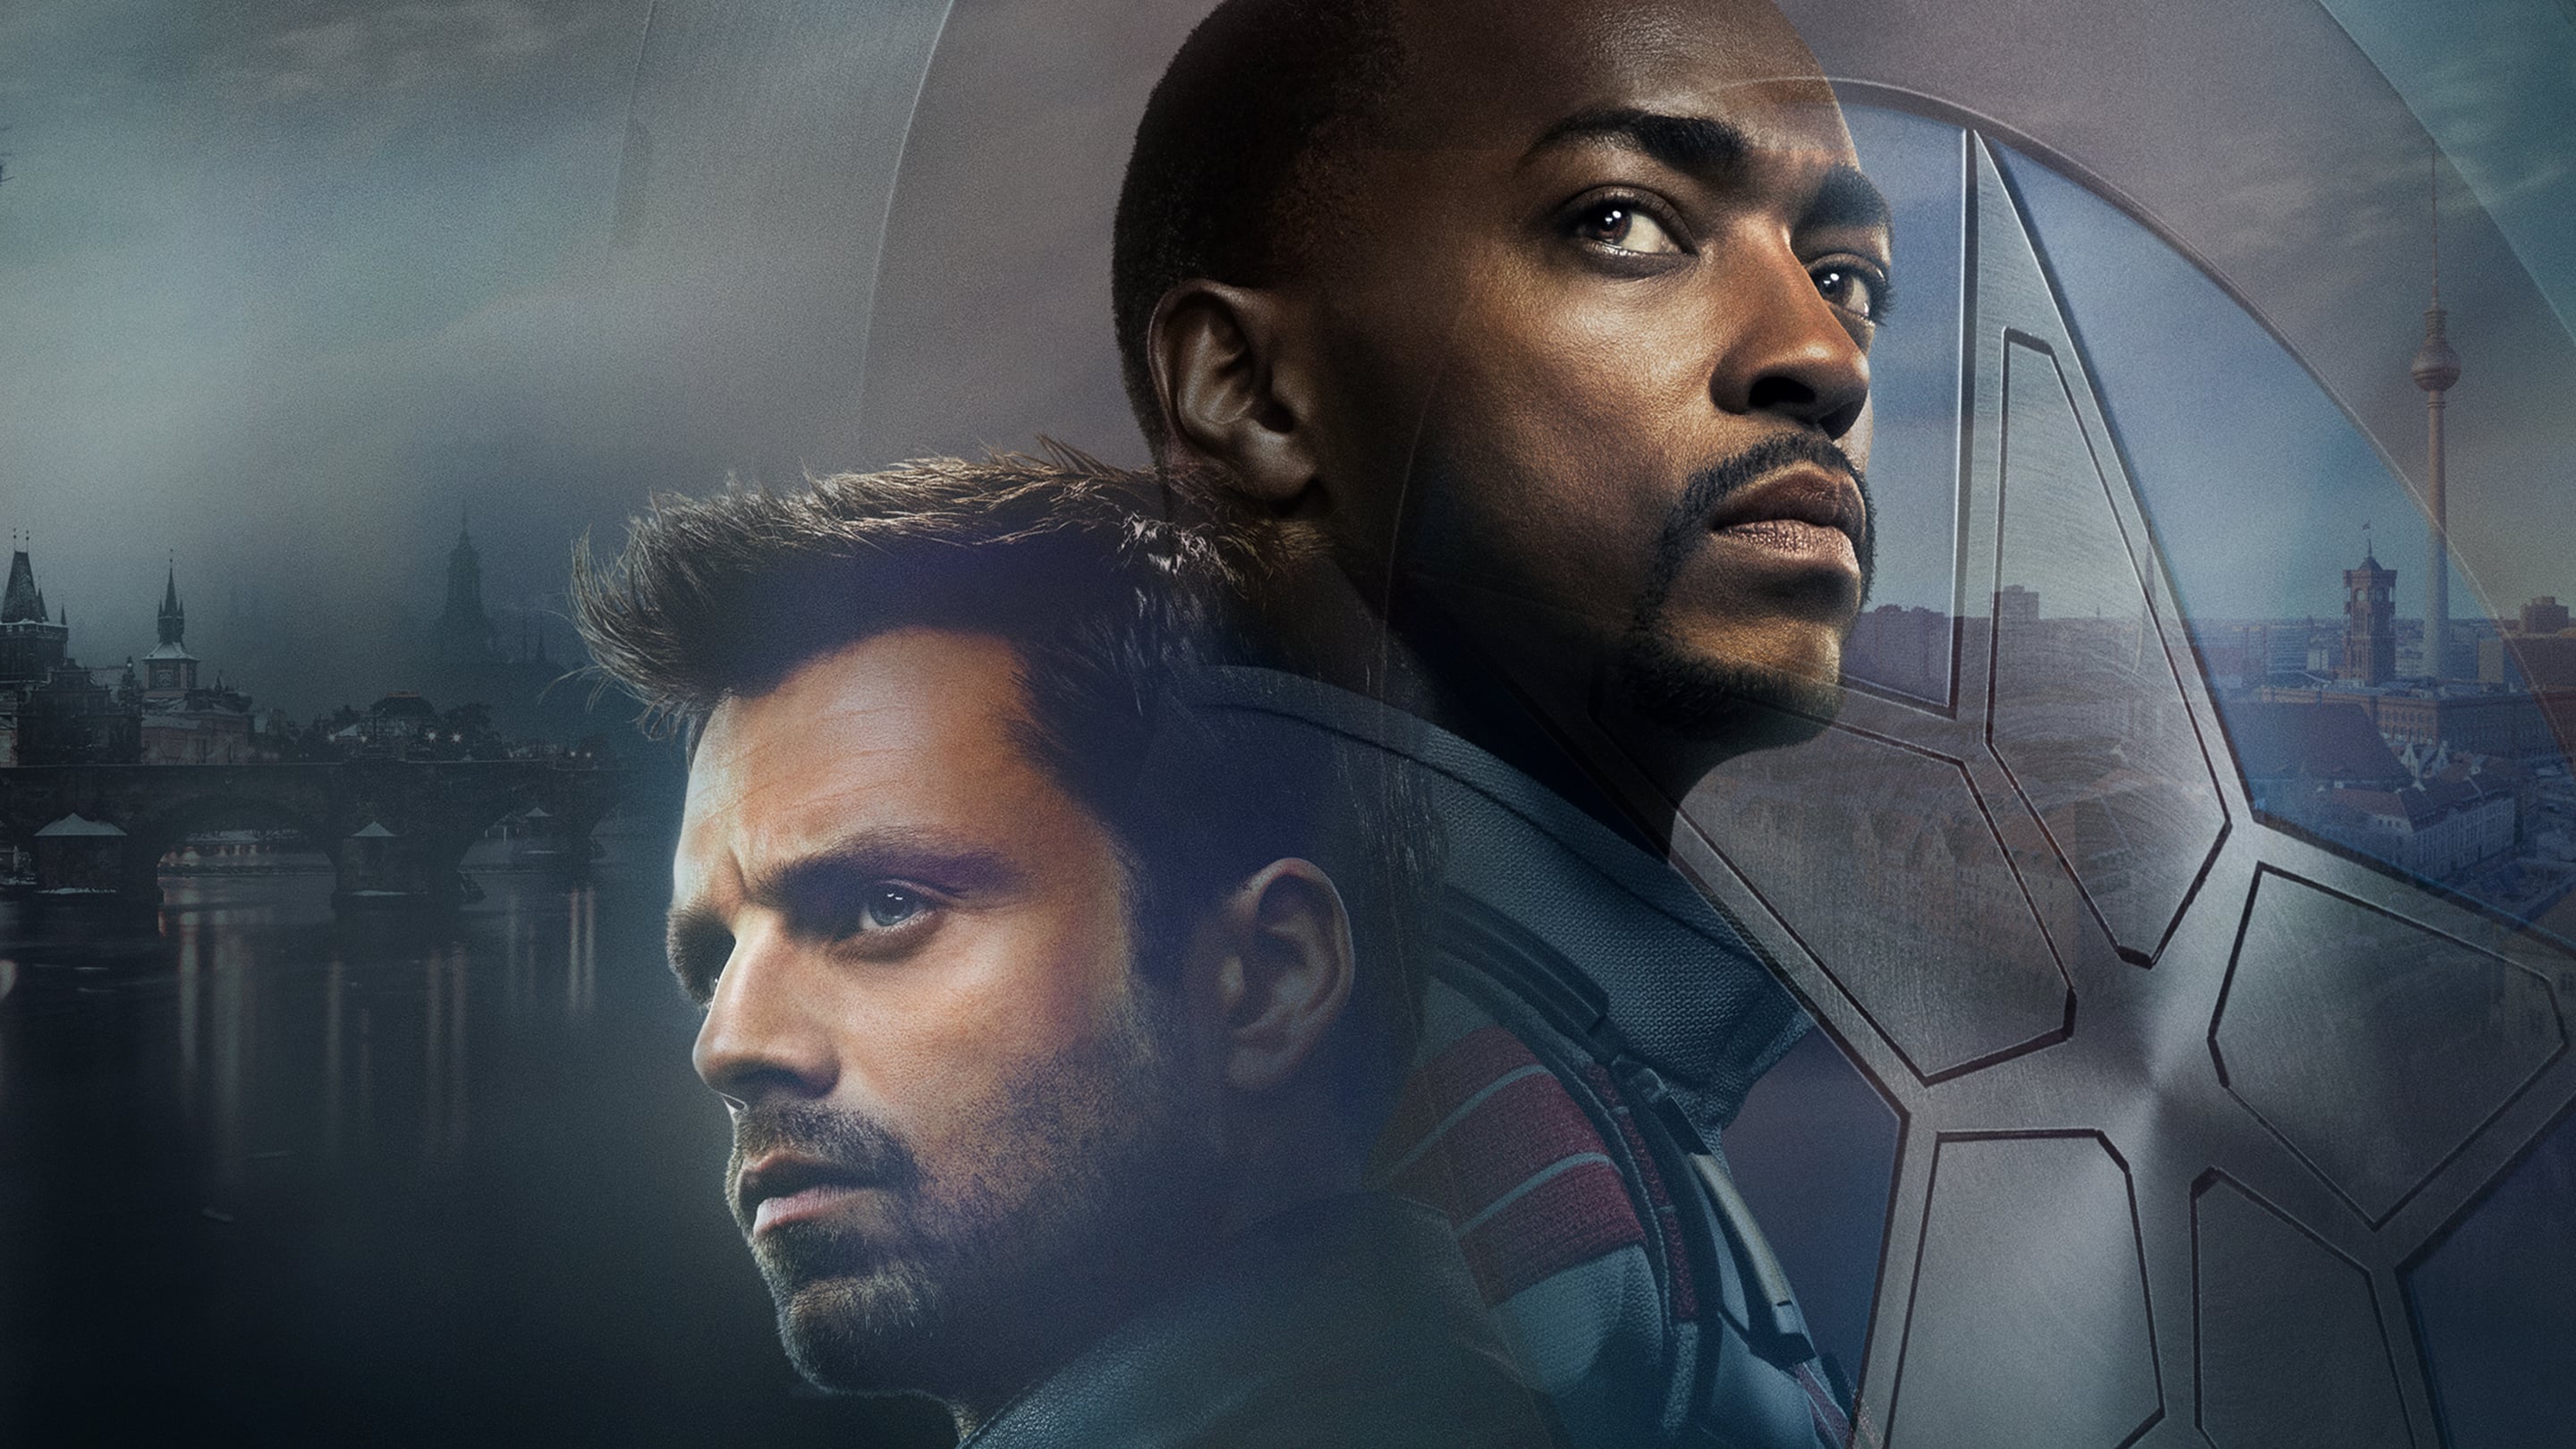 TV Show The Falcon and the Winter Soldier HD Wallpaper